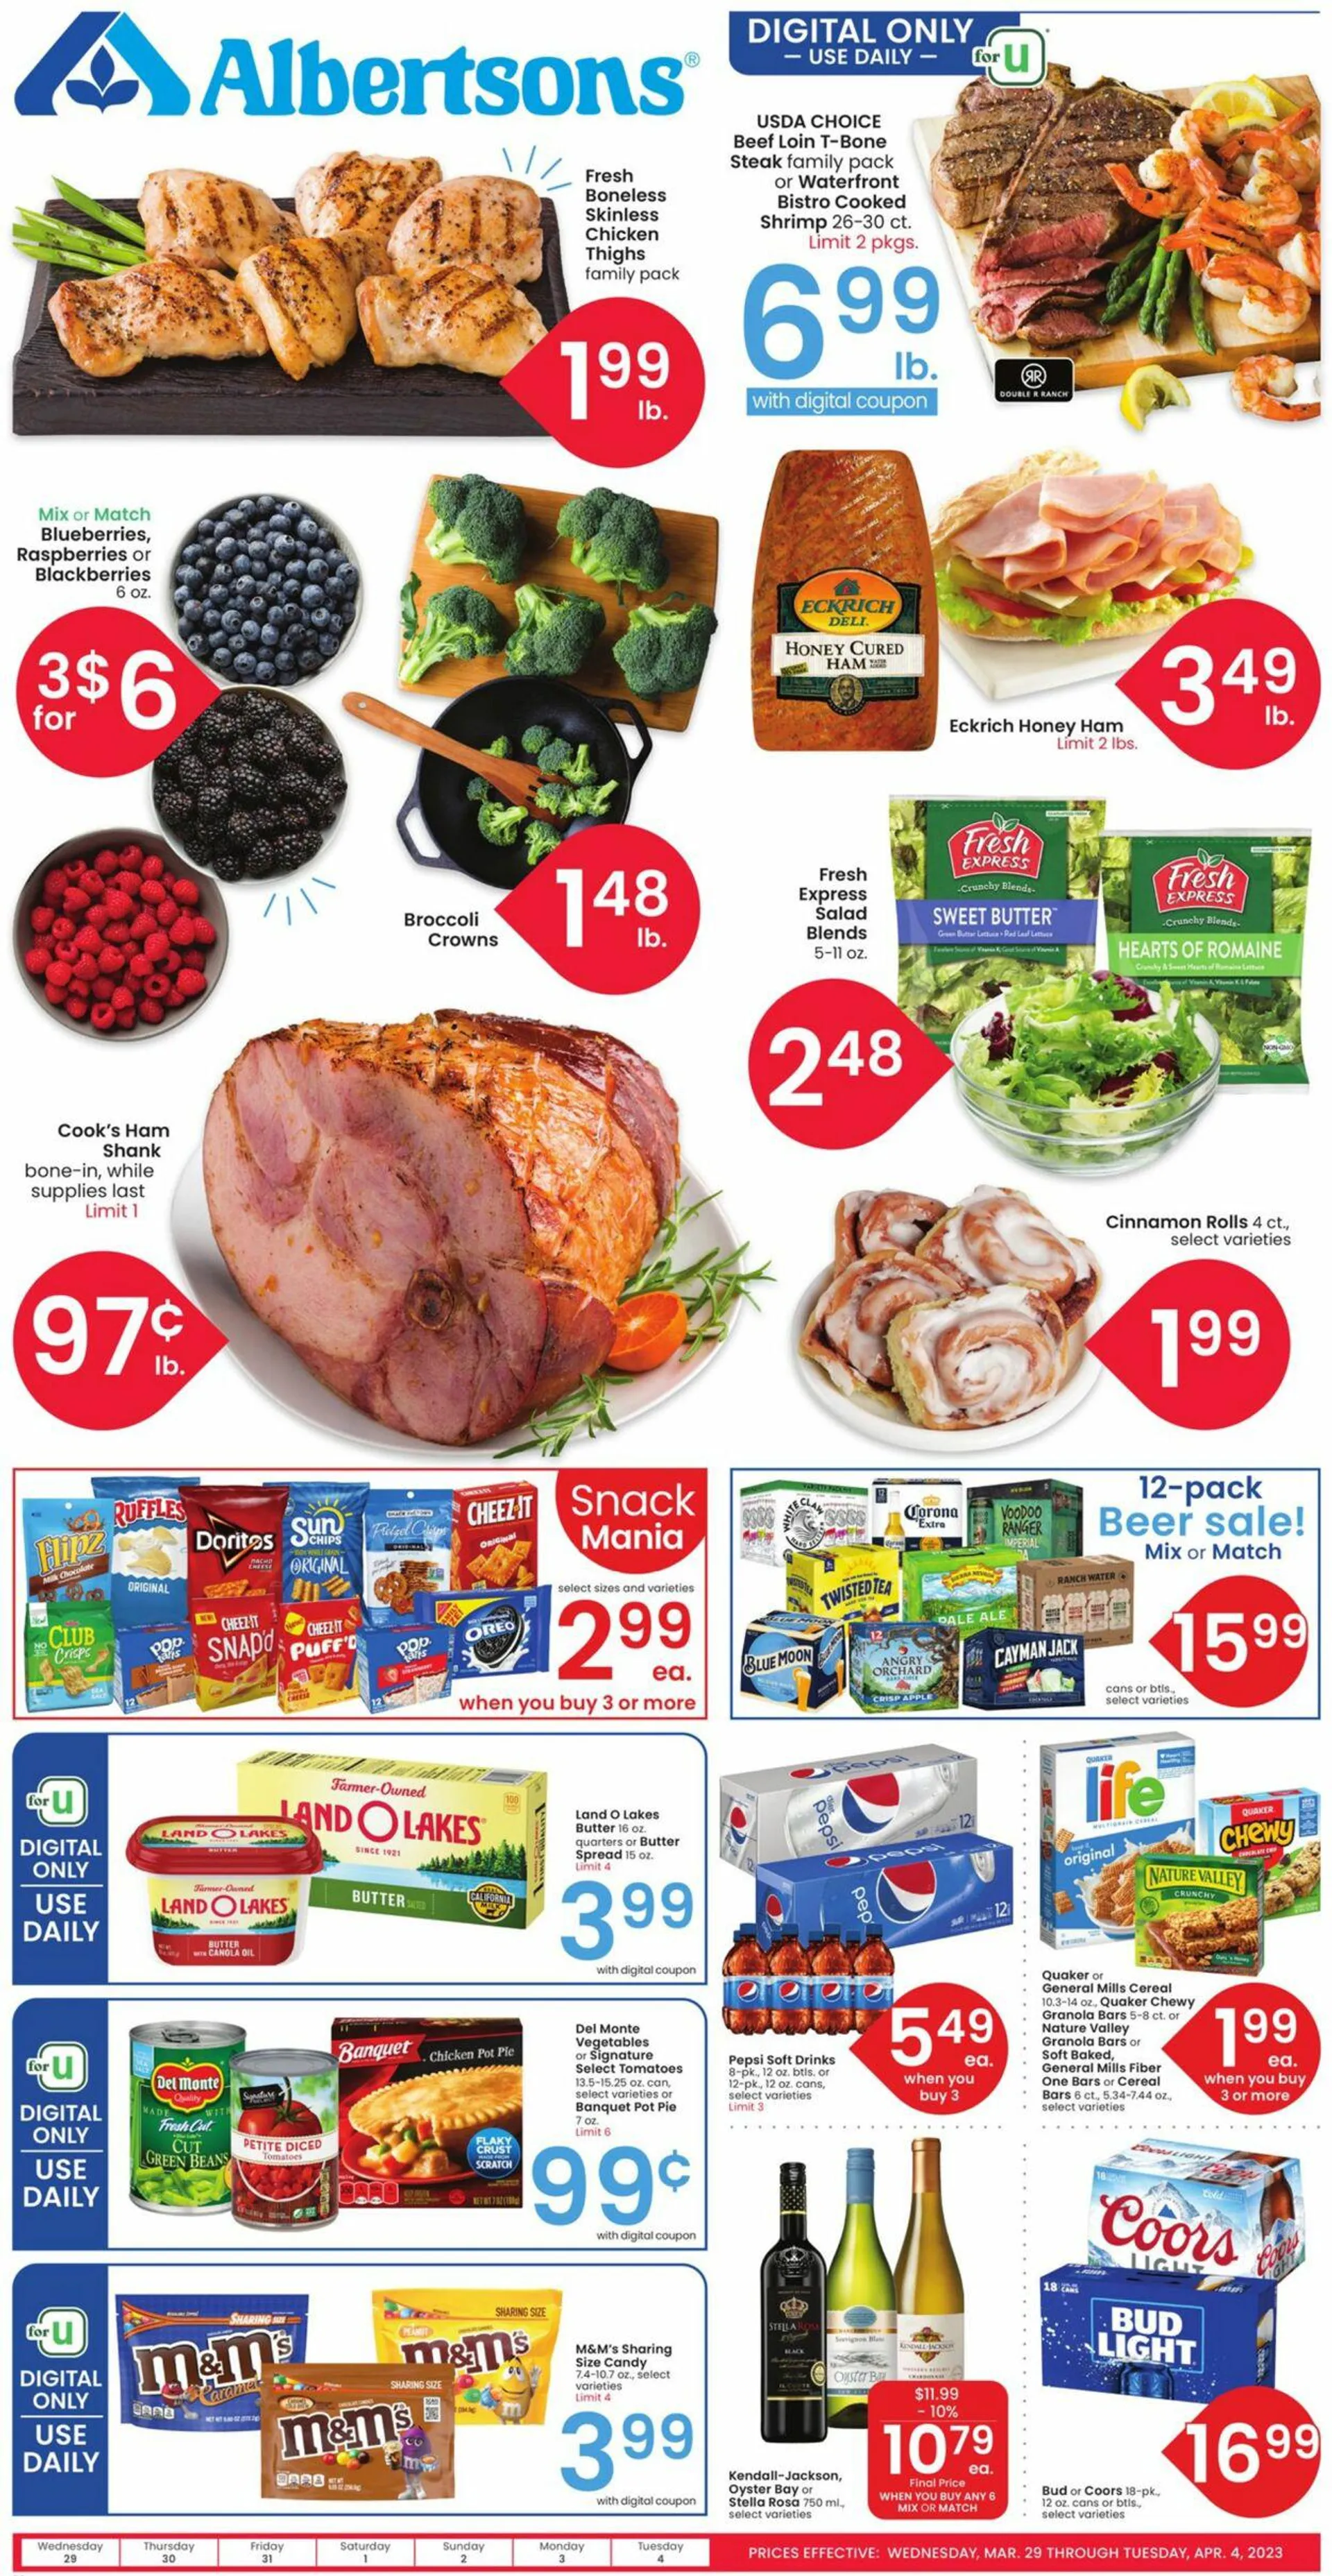 Albertsons Current weekly ad - 1